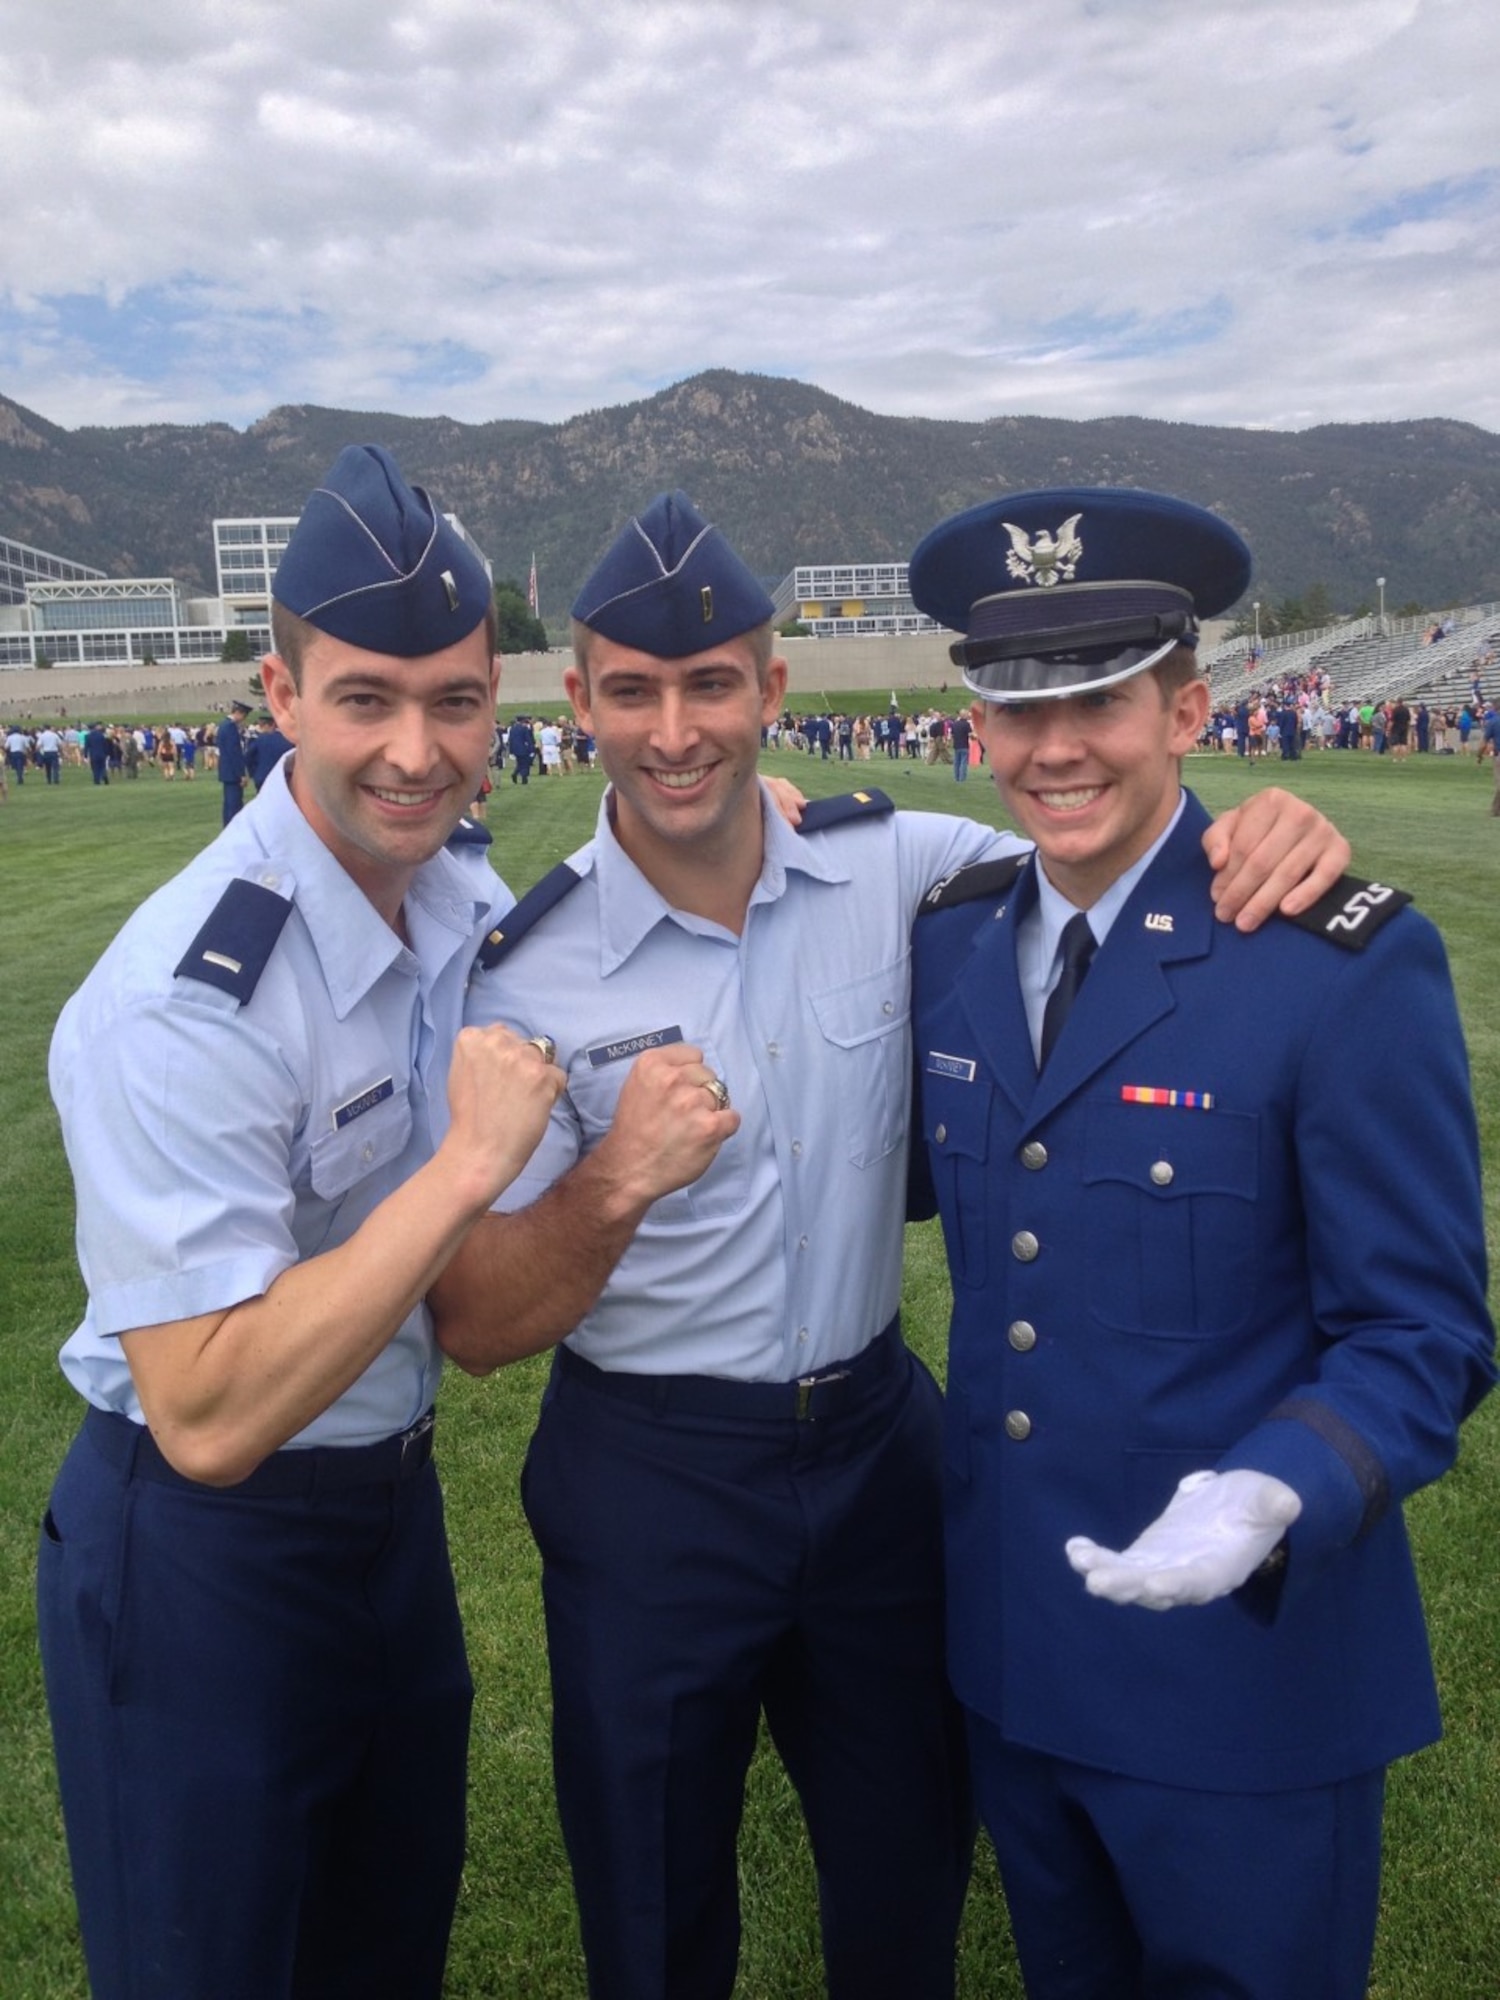 Brothers Austin, Connor and Lucas Mckinney spend time together at the Air Force Academy. Austin graduated in 2010, Connor graduated in 2013 and Lucas graduated in 2017. (Courtesy Photo)